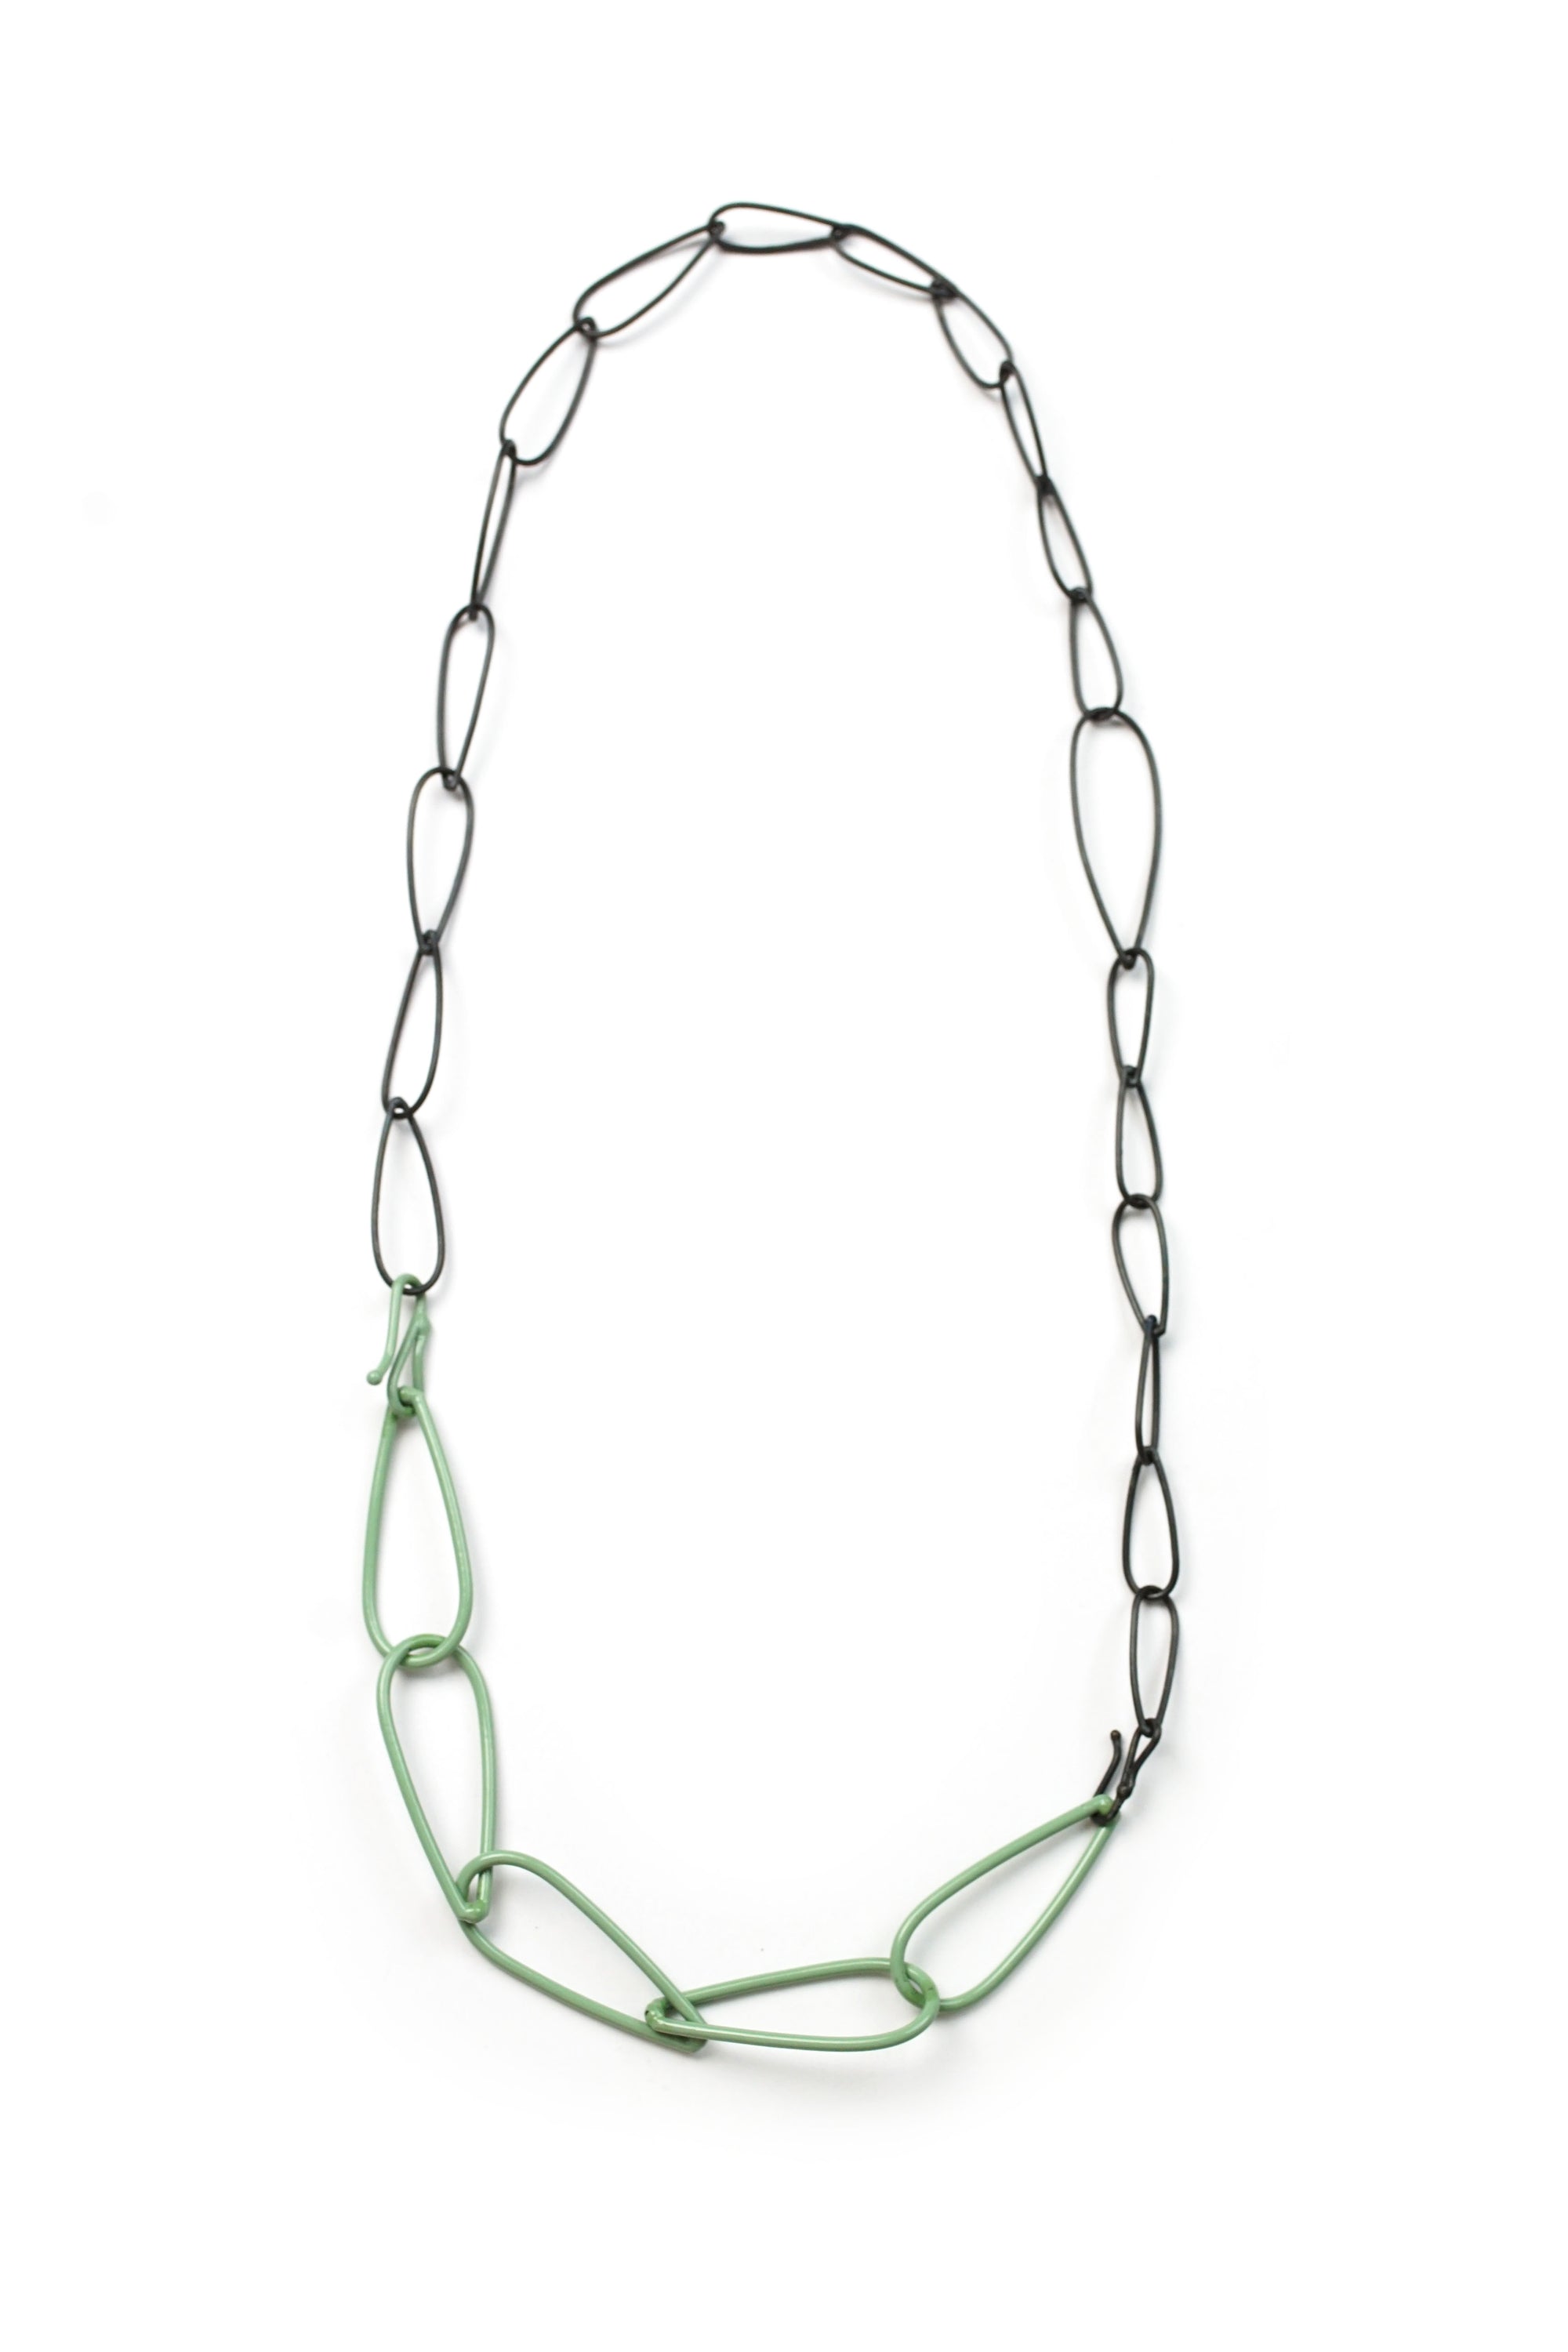 Modular Necklace in Steel and Pale Green